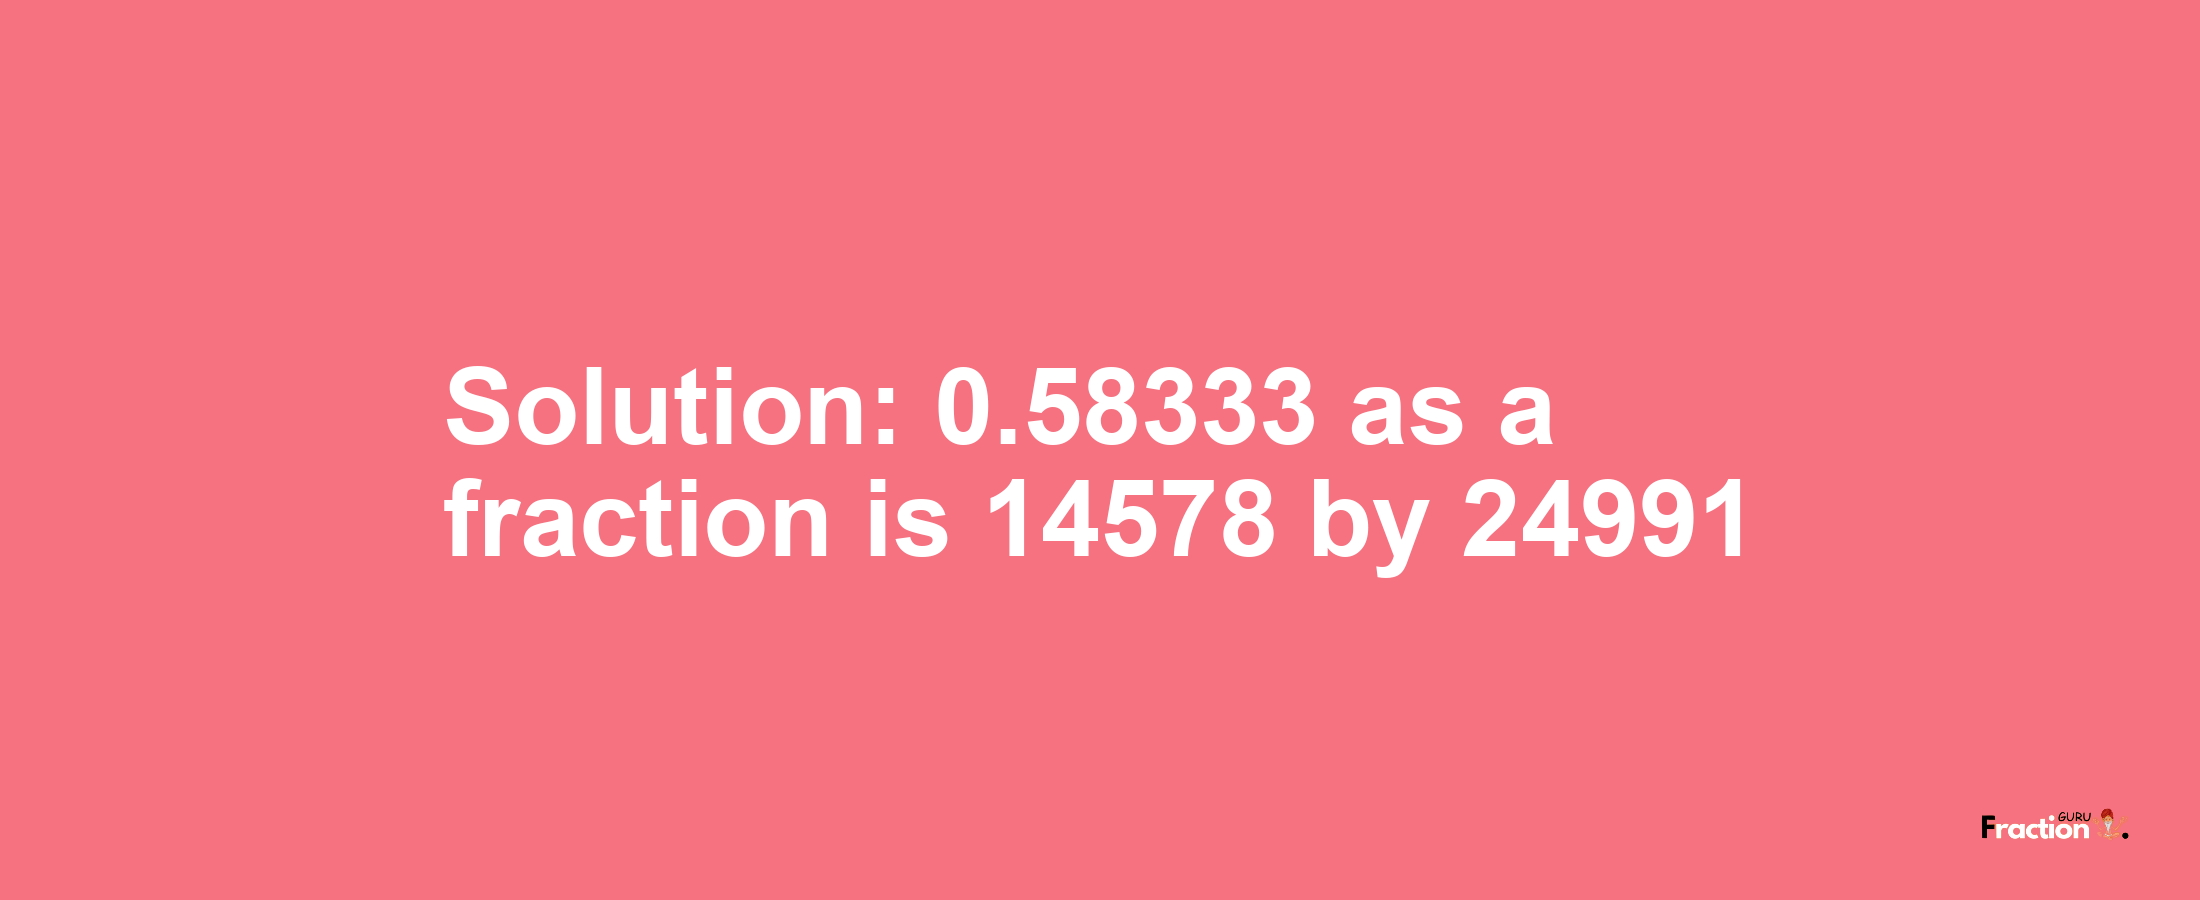 Solution:0.58333 as a fraction is 14578/24991